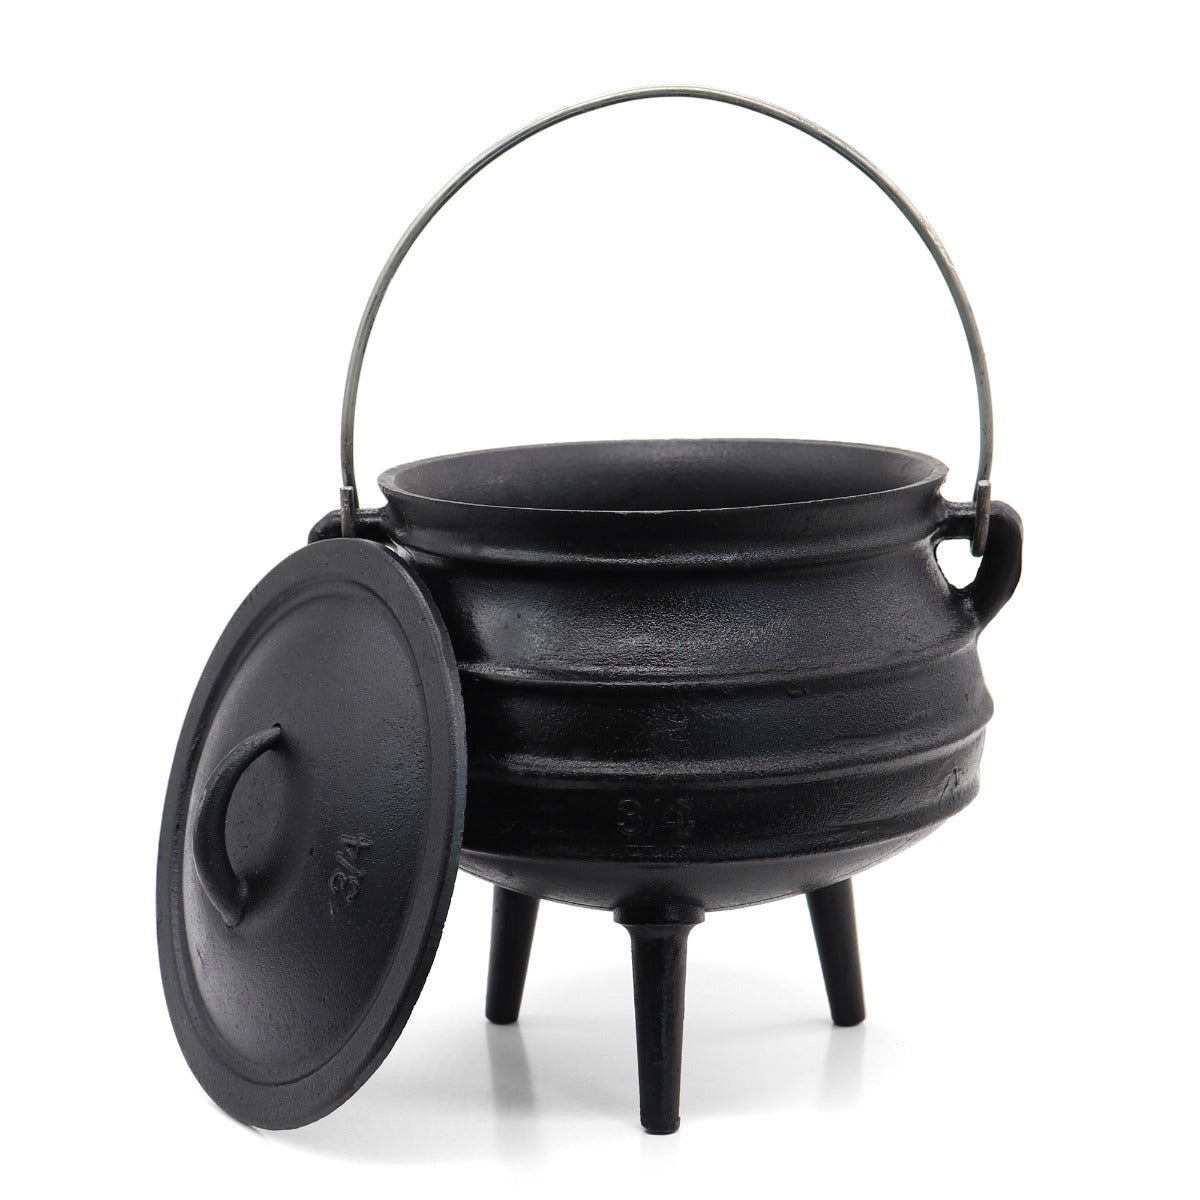 The Best Way To Clean & Season Your Potjie Pot / Cast Iron Pot